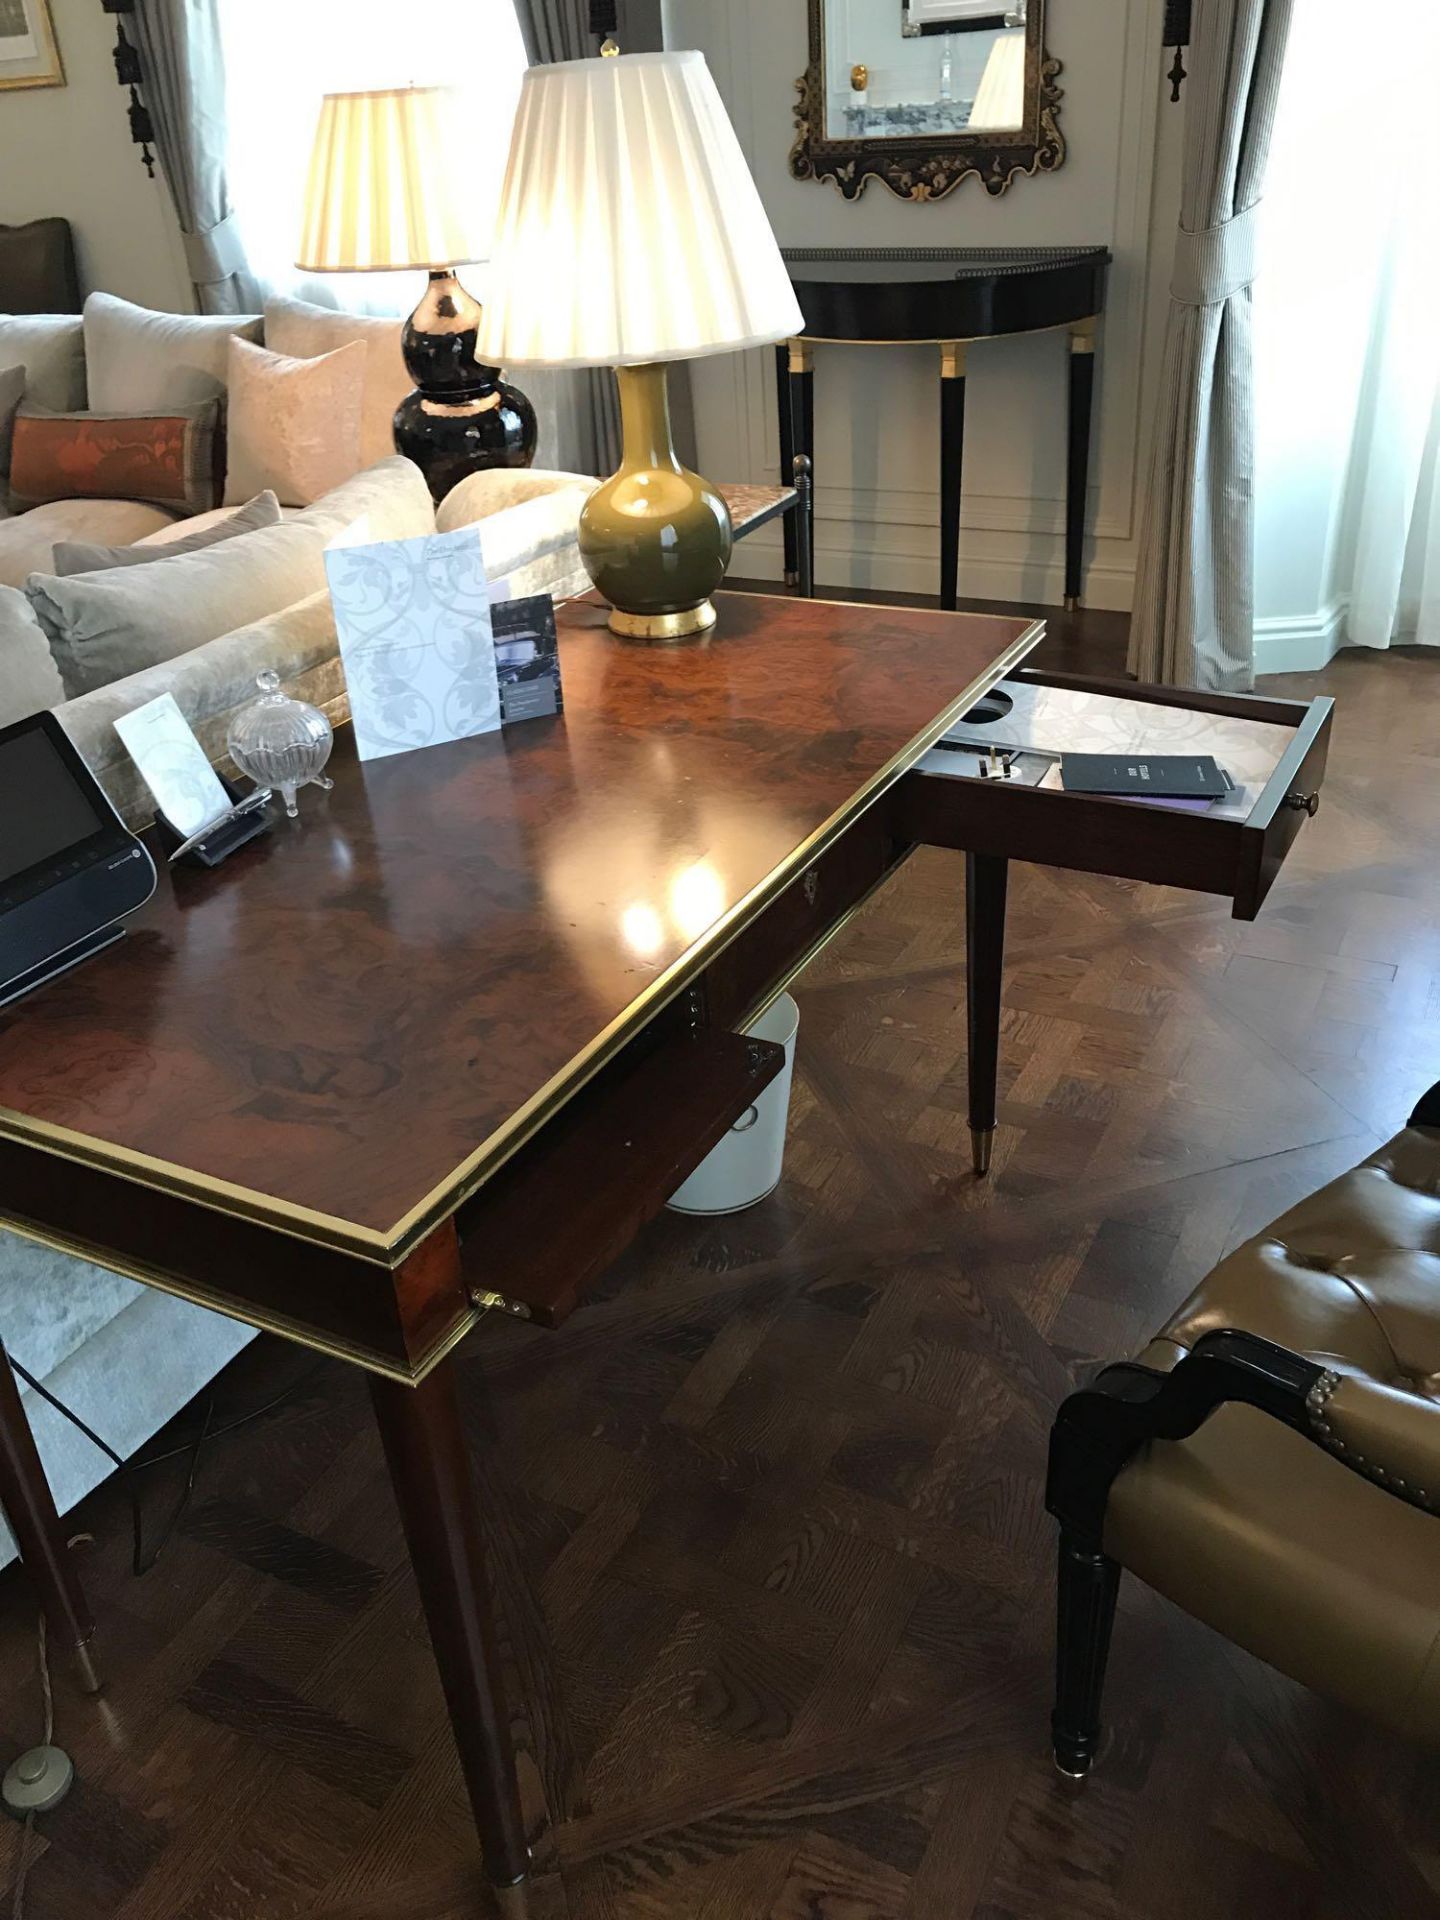 Burr Mahogany And ;Brass Writing Table Mounted On Turned Legs Fitted With Outlets, And USB Ports - Image 2 of 2